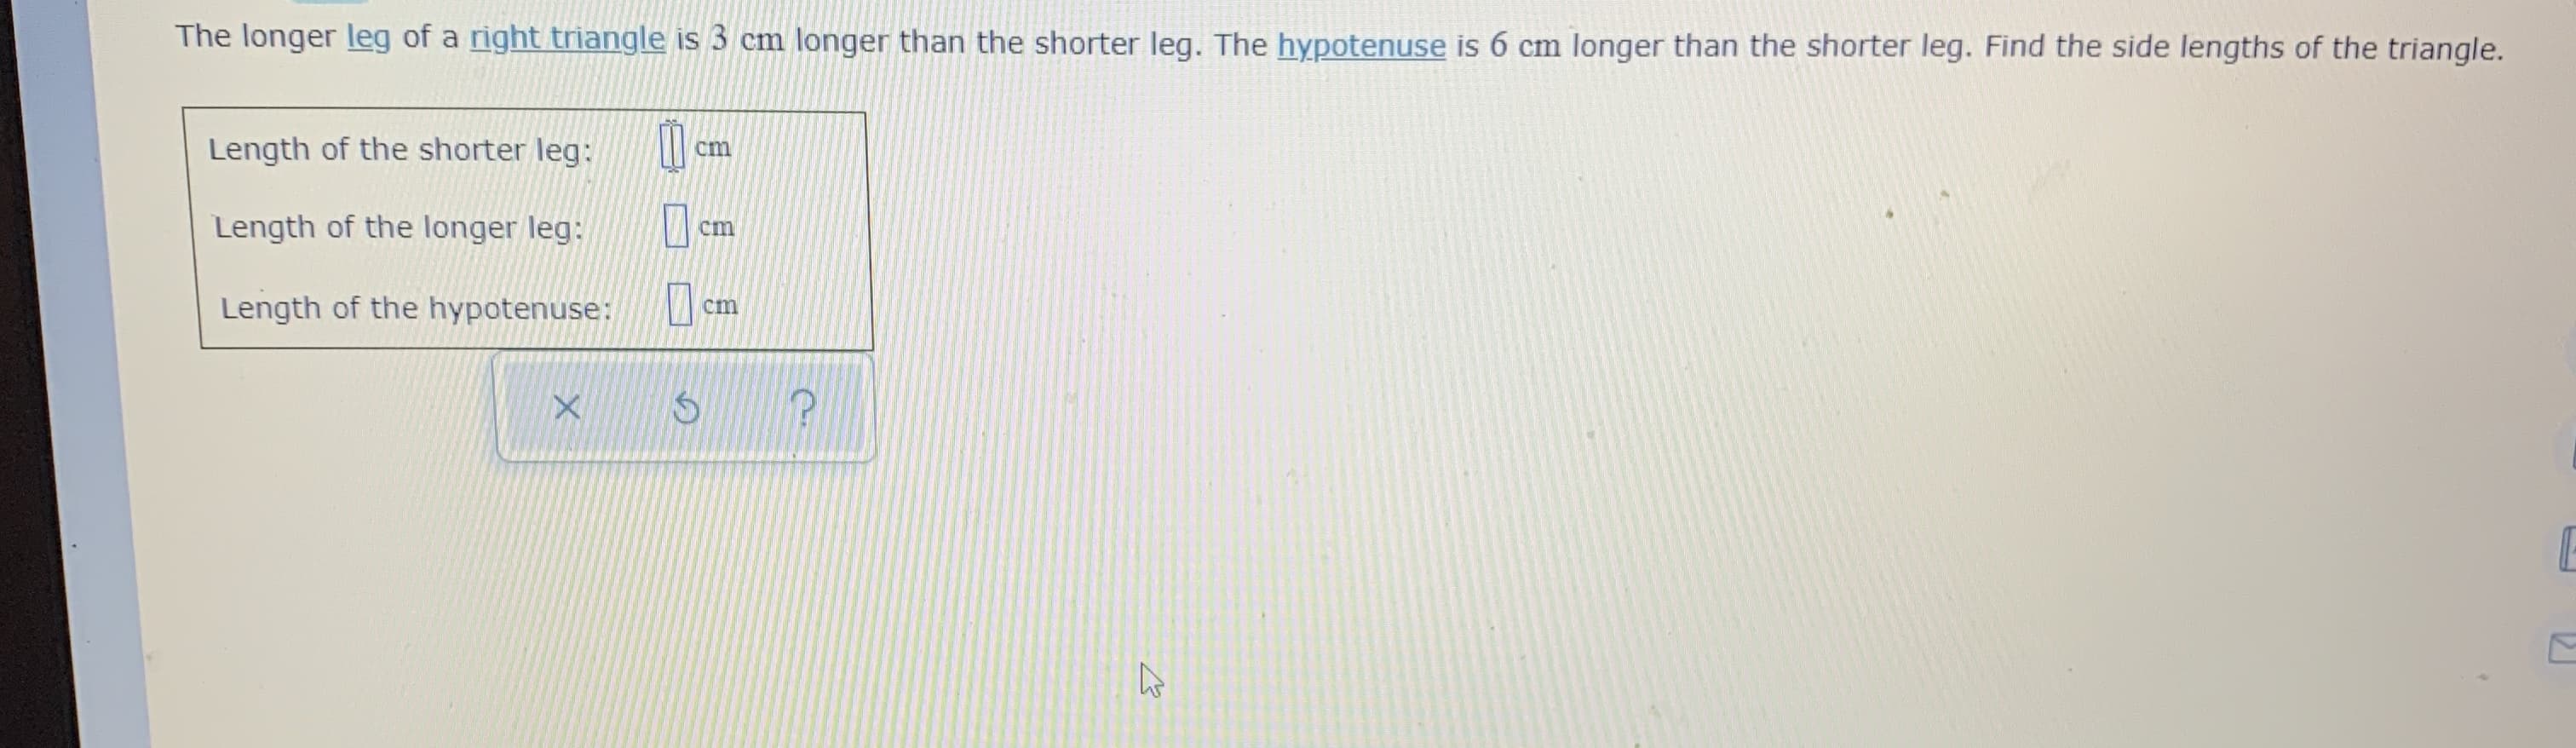 The longer leg of a right triangle is 3 cm longer than the shorter leg. The hypotenuse is 6 cm longer than the shorter leg. Find the side lengths of the triar
Length of the shorter leg:
cm
Length of the longer leg:
cm
Length of the hypotenuse:
cm
